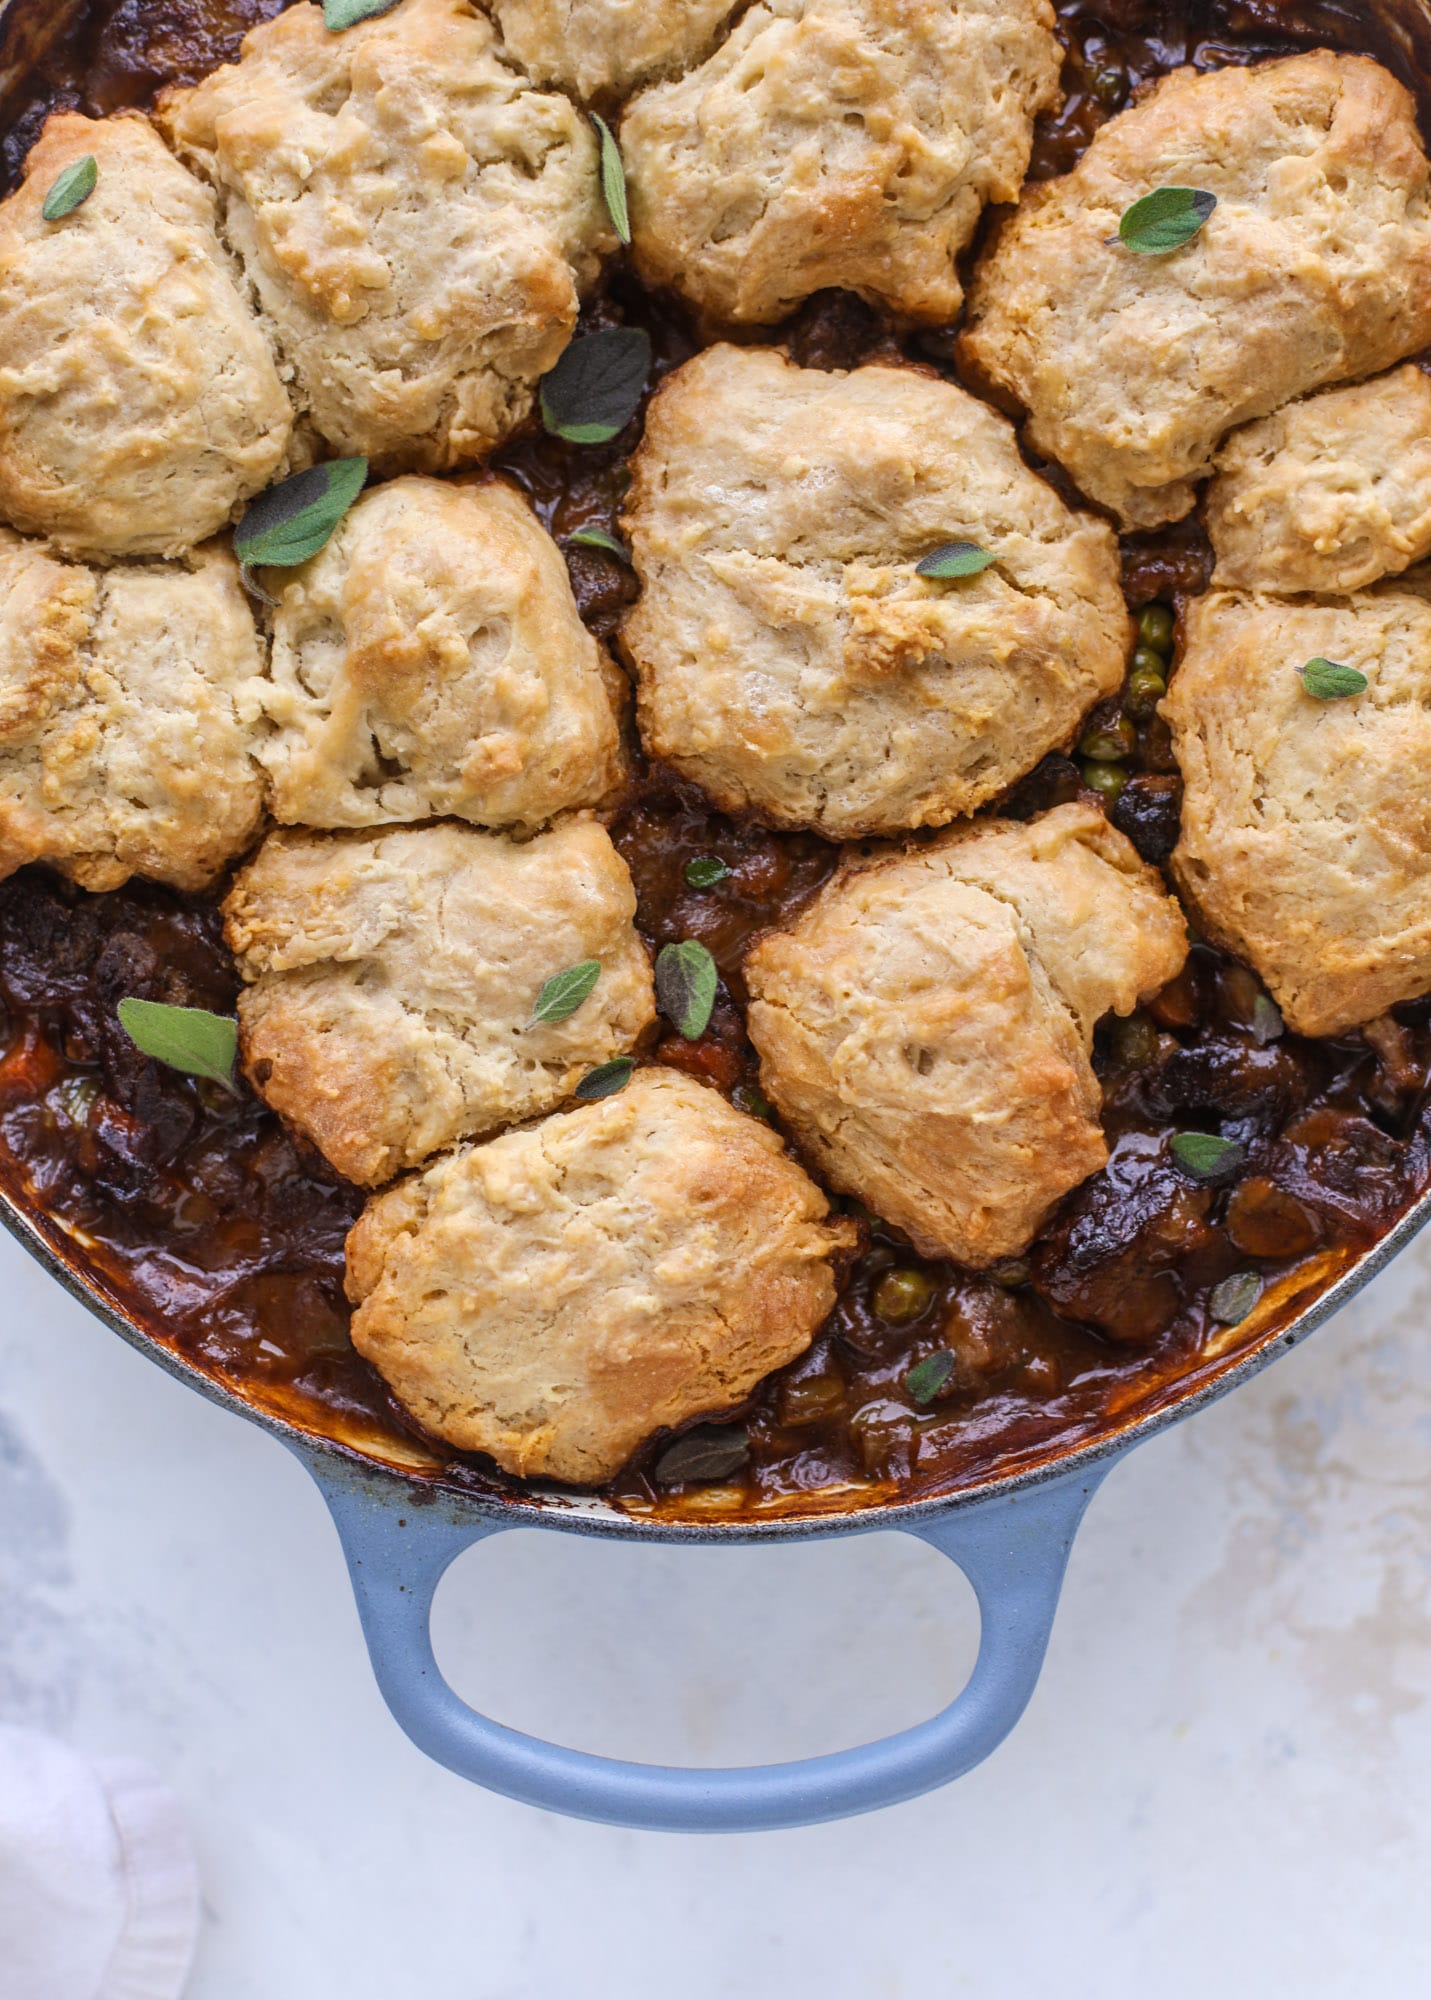  A perfect cold weather comfort food meal, Guiness pot pie has tender, fall-apart beef, lots of vegetables and is topped with buttery beer bread biscuits! I howsweeteats.com #guinness #potpie